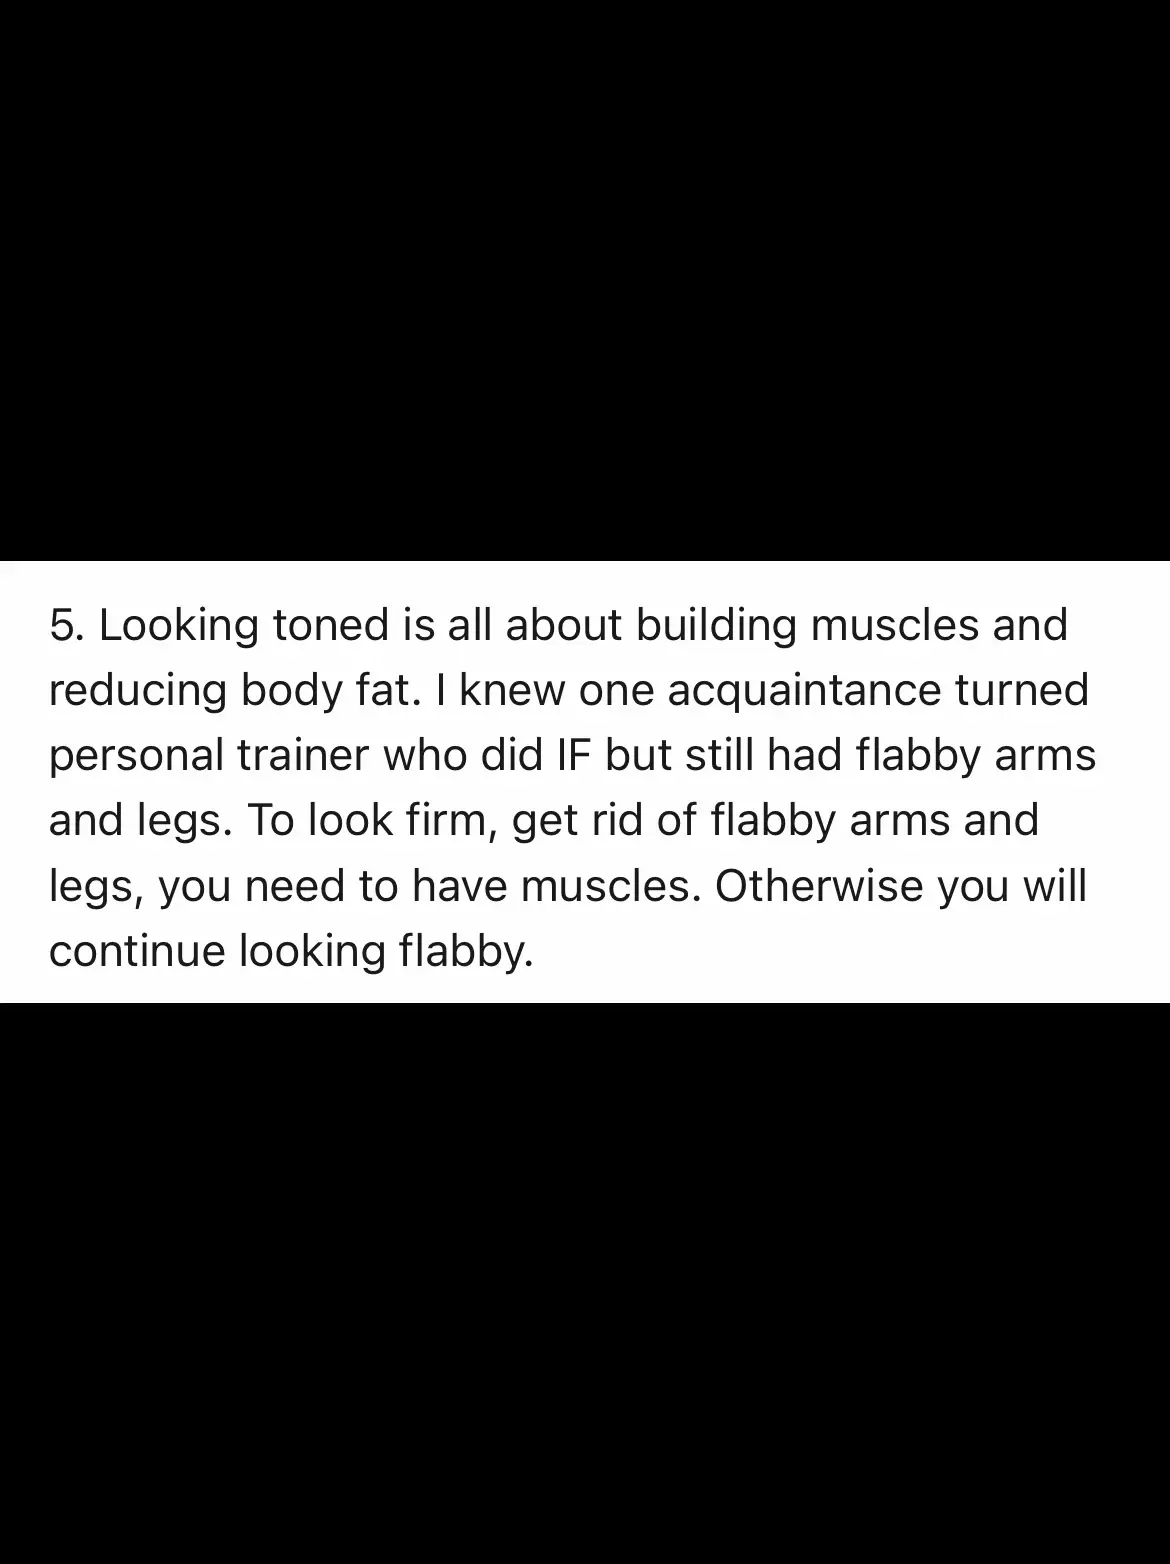 2 best exercise to help u get rid of flabby arms